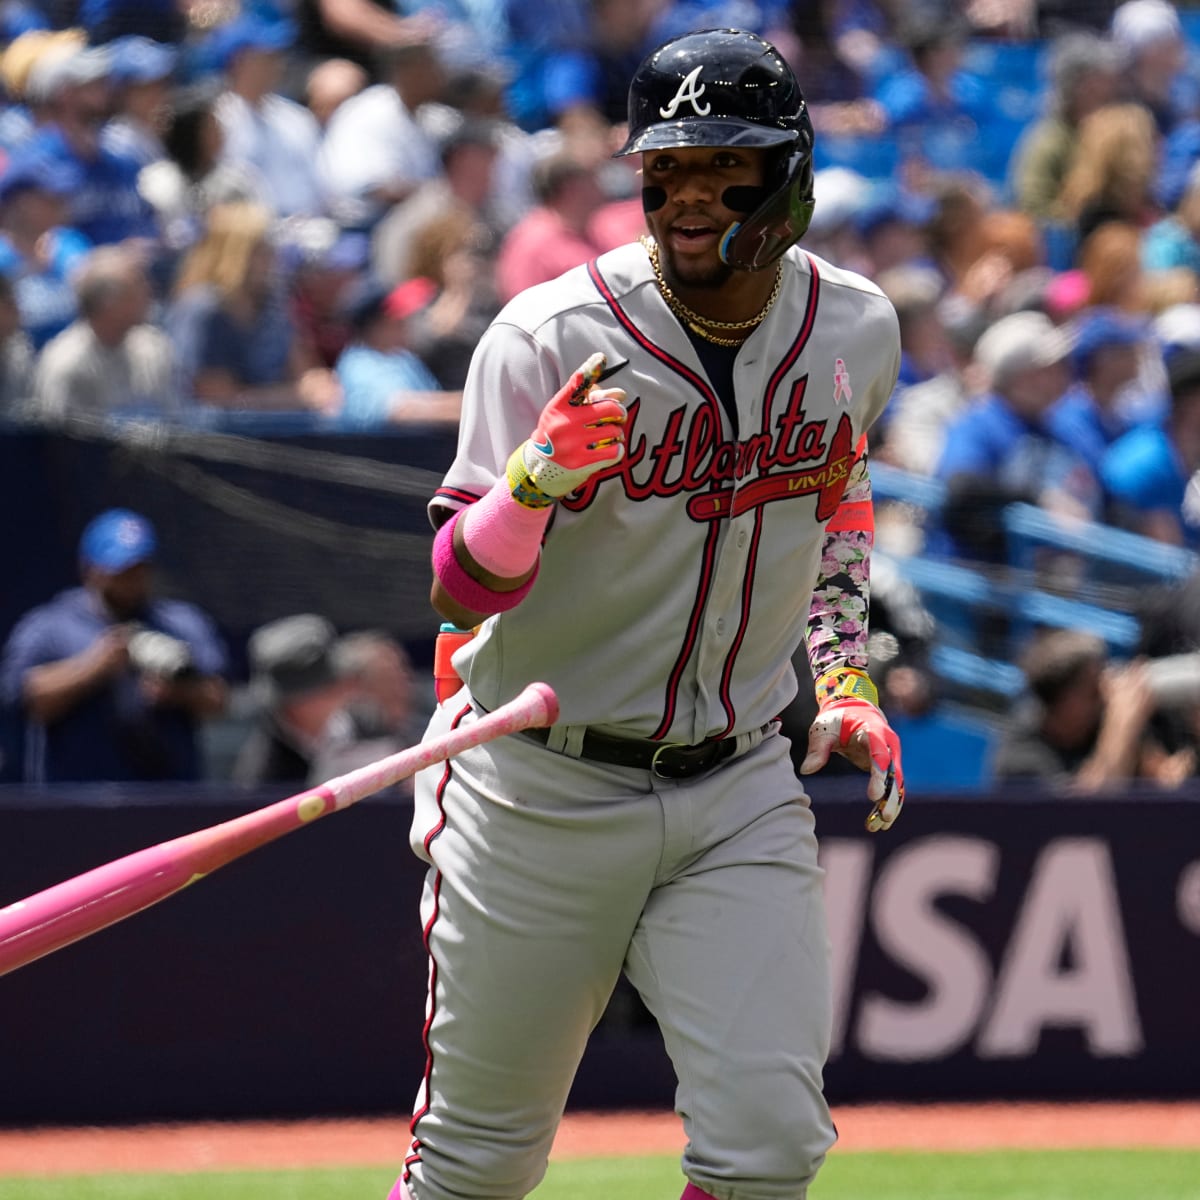 Ronald Acuña Jr. ties game with pinch hit RBI double